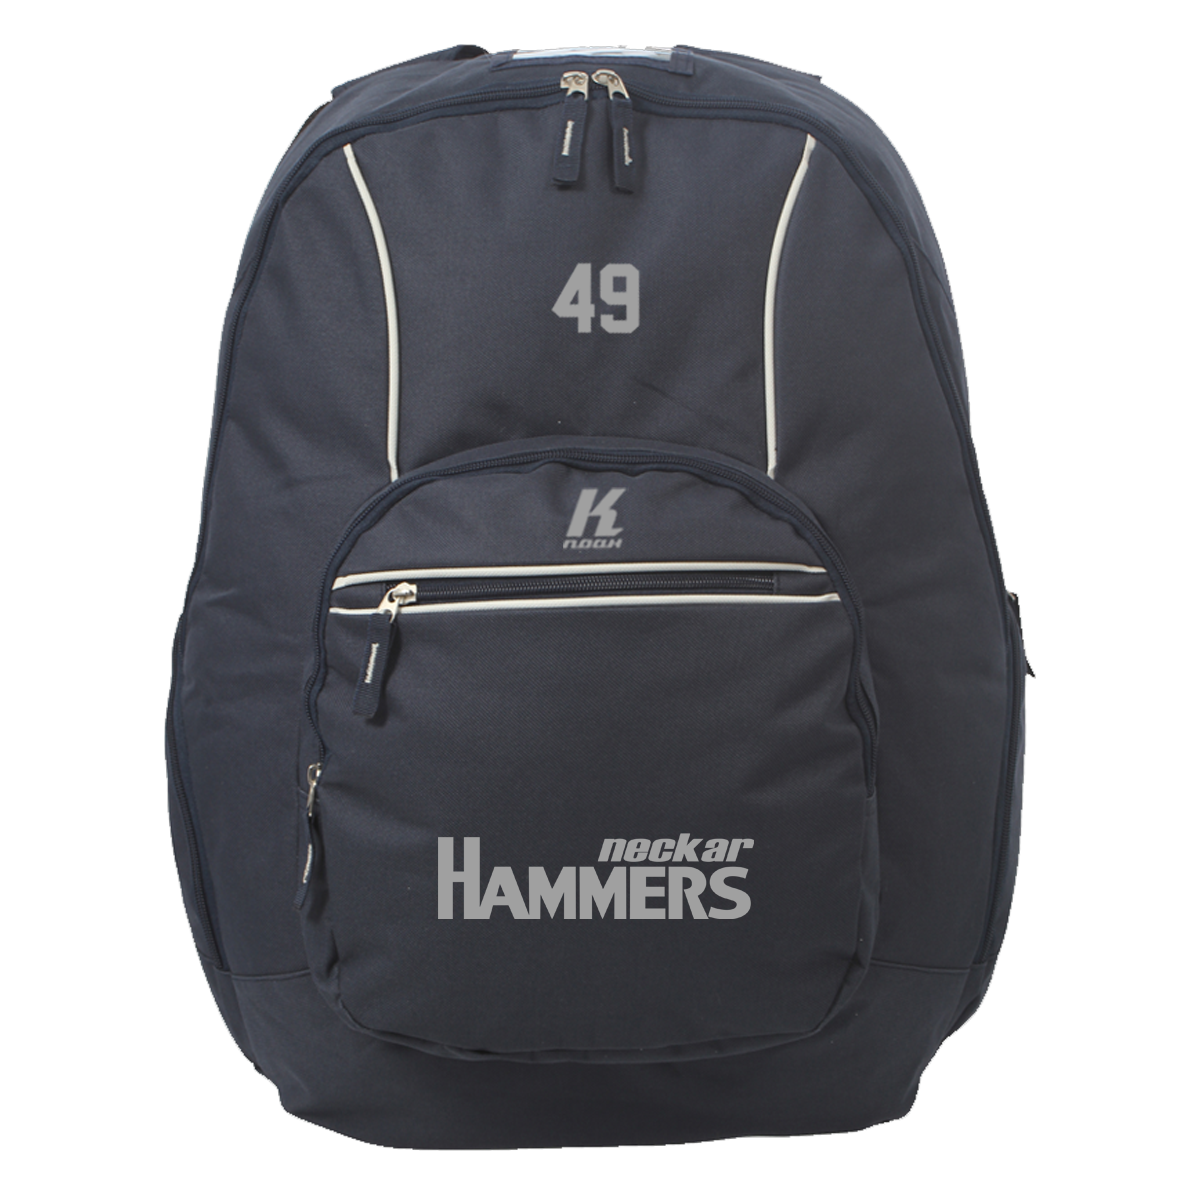 Hammers Heritage Backpack with Playernumber or Initials